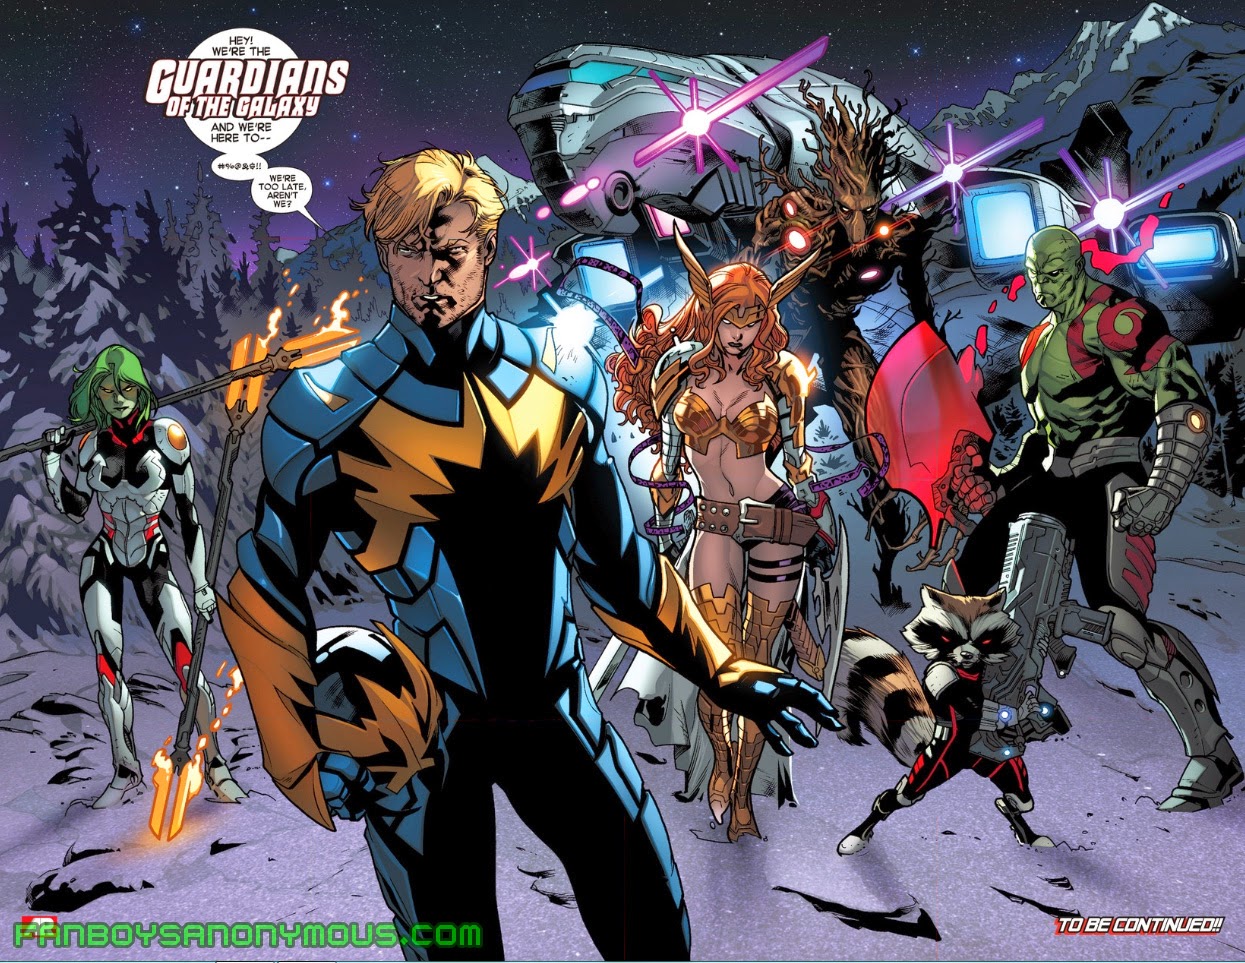 All-New-X-Men-issue-22-Guardians-arrival.jpg